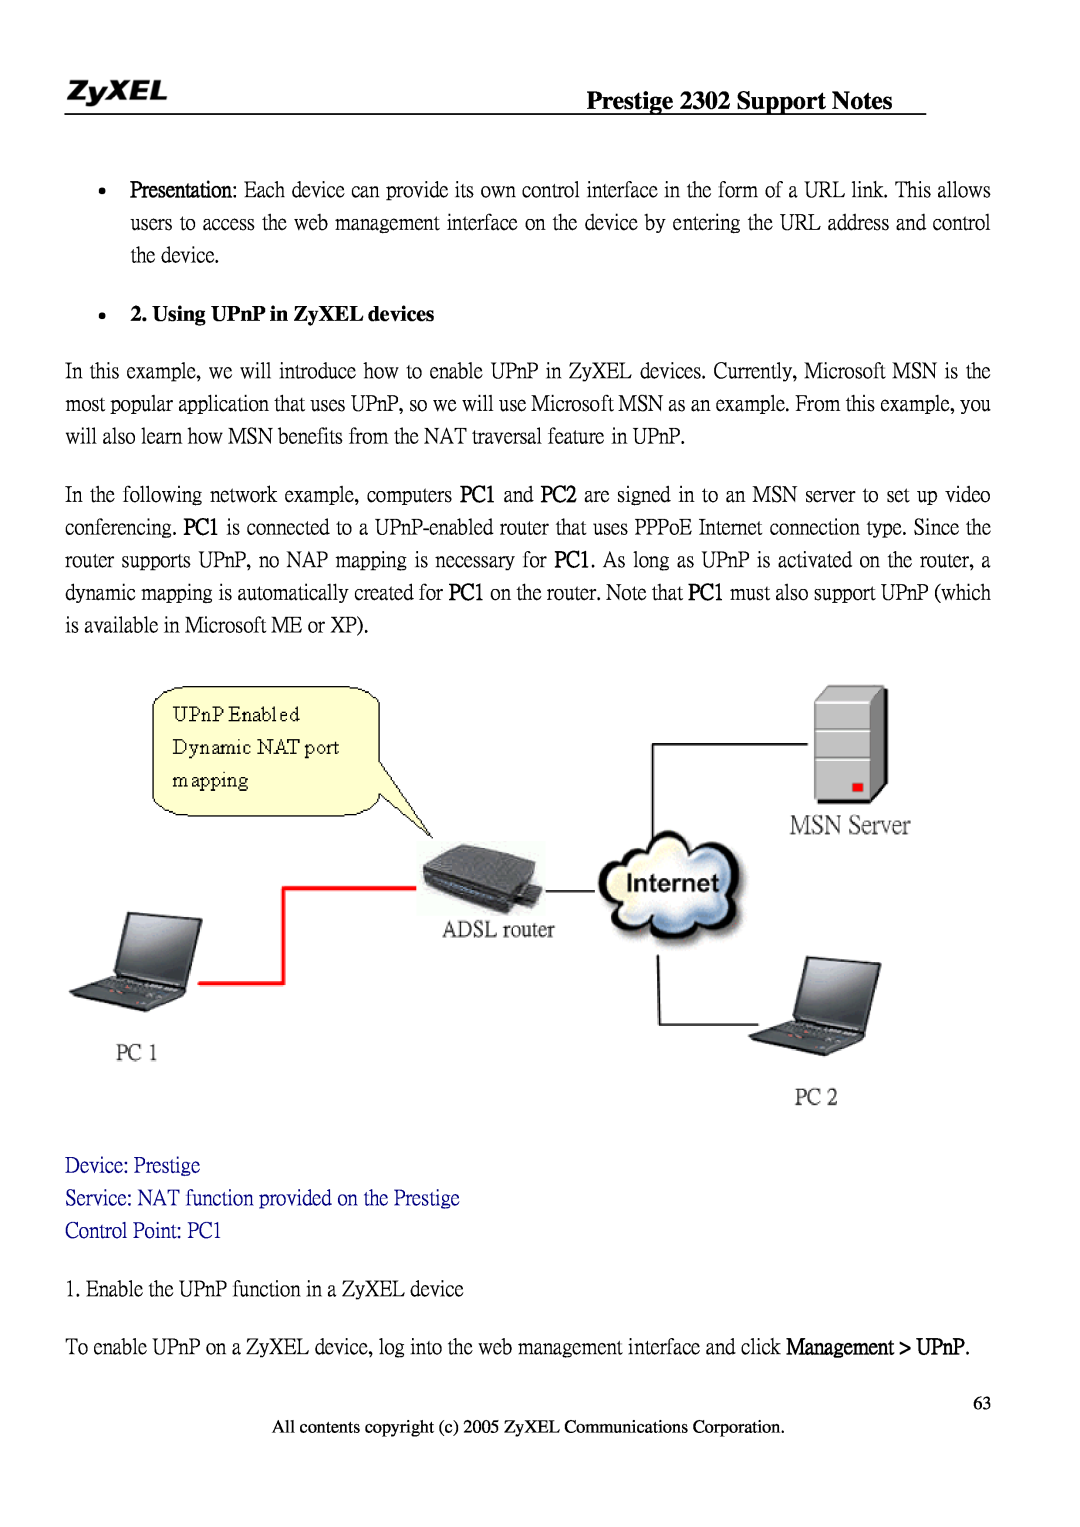 ZyXEL Communications P-2302HW manual Using UPnP in ZyXEL devices, Prestige 2302 Support Notes, Control Point PC1 